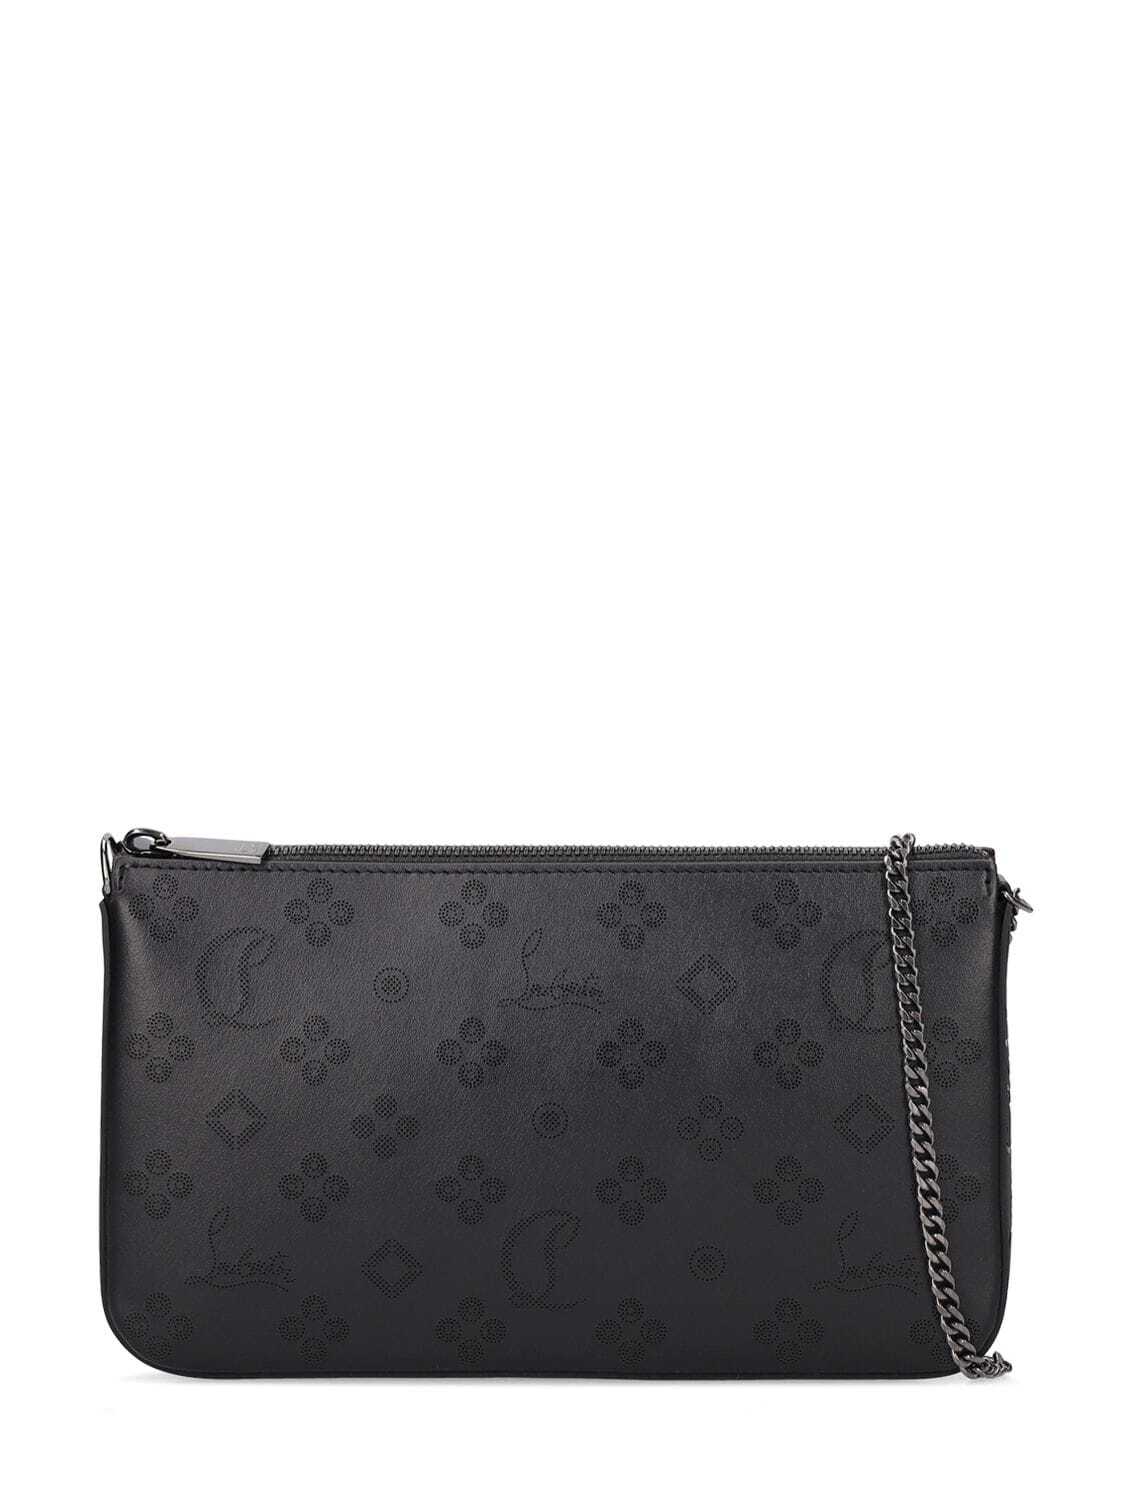 CHRISTIAN LOUBOUTIN Loubila Perforated Leather Shoulder Bag in black